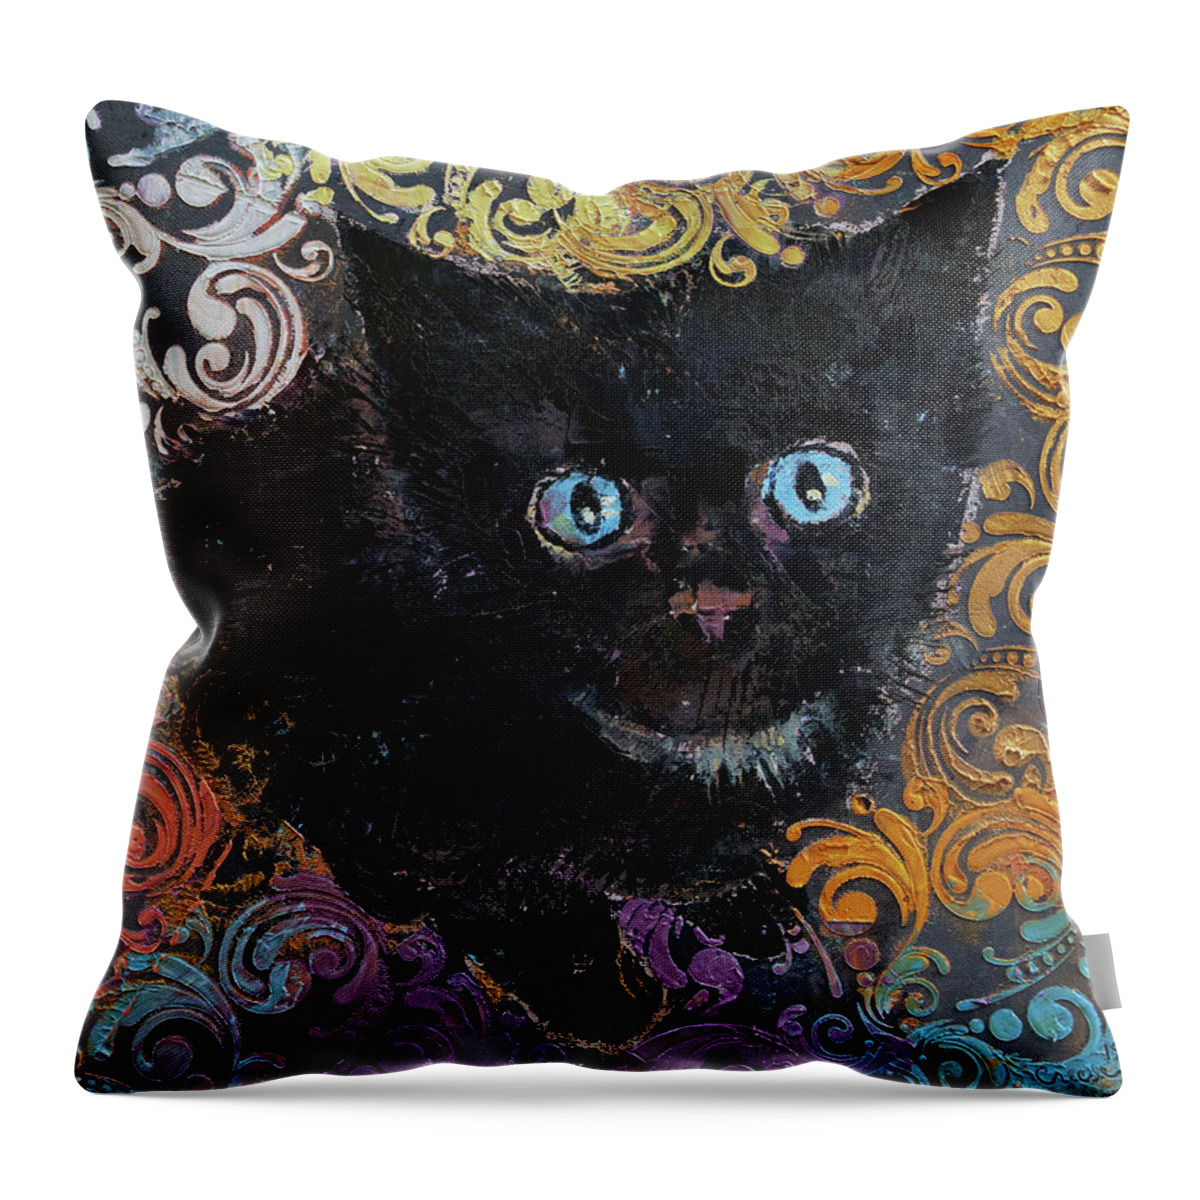 Halloween Throw Pillow featuring the painting Little Black Kitten by Michael Creese